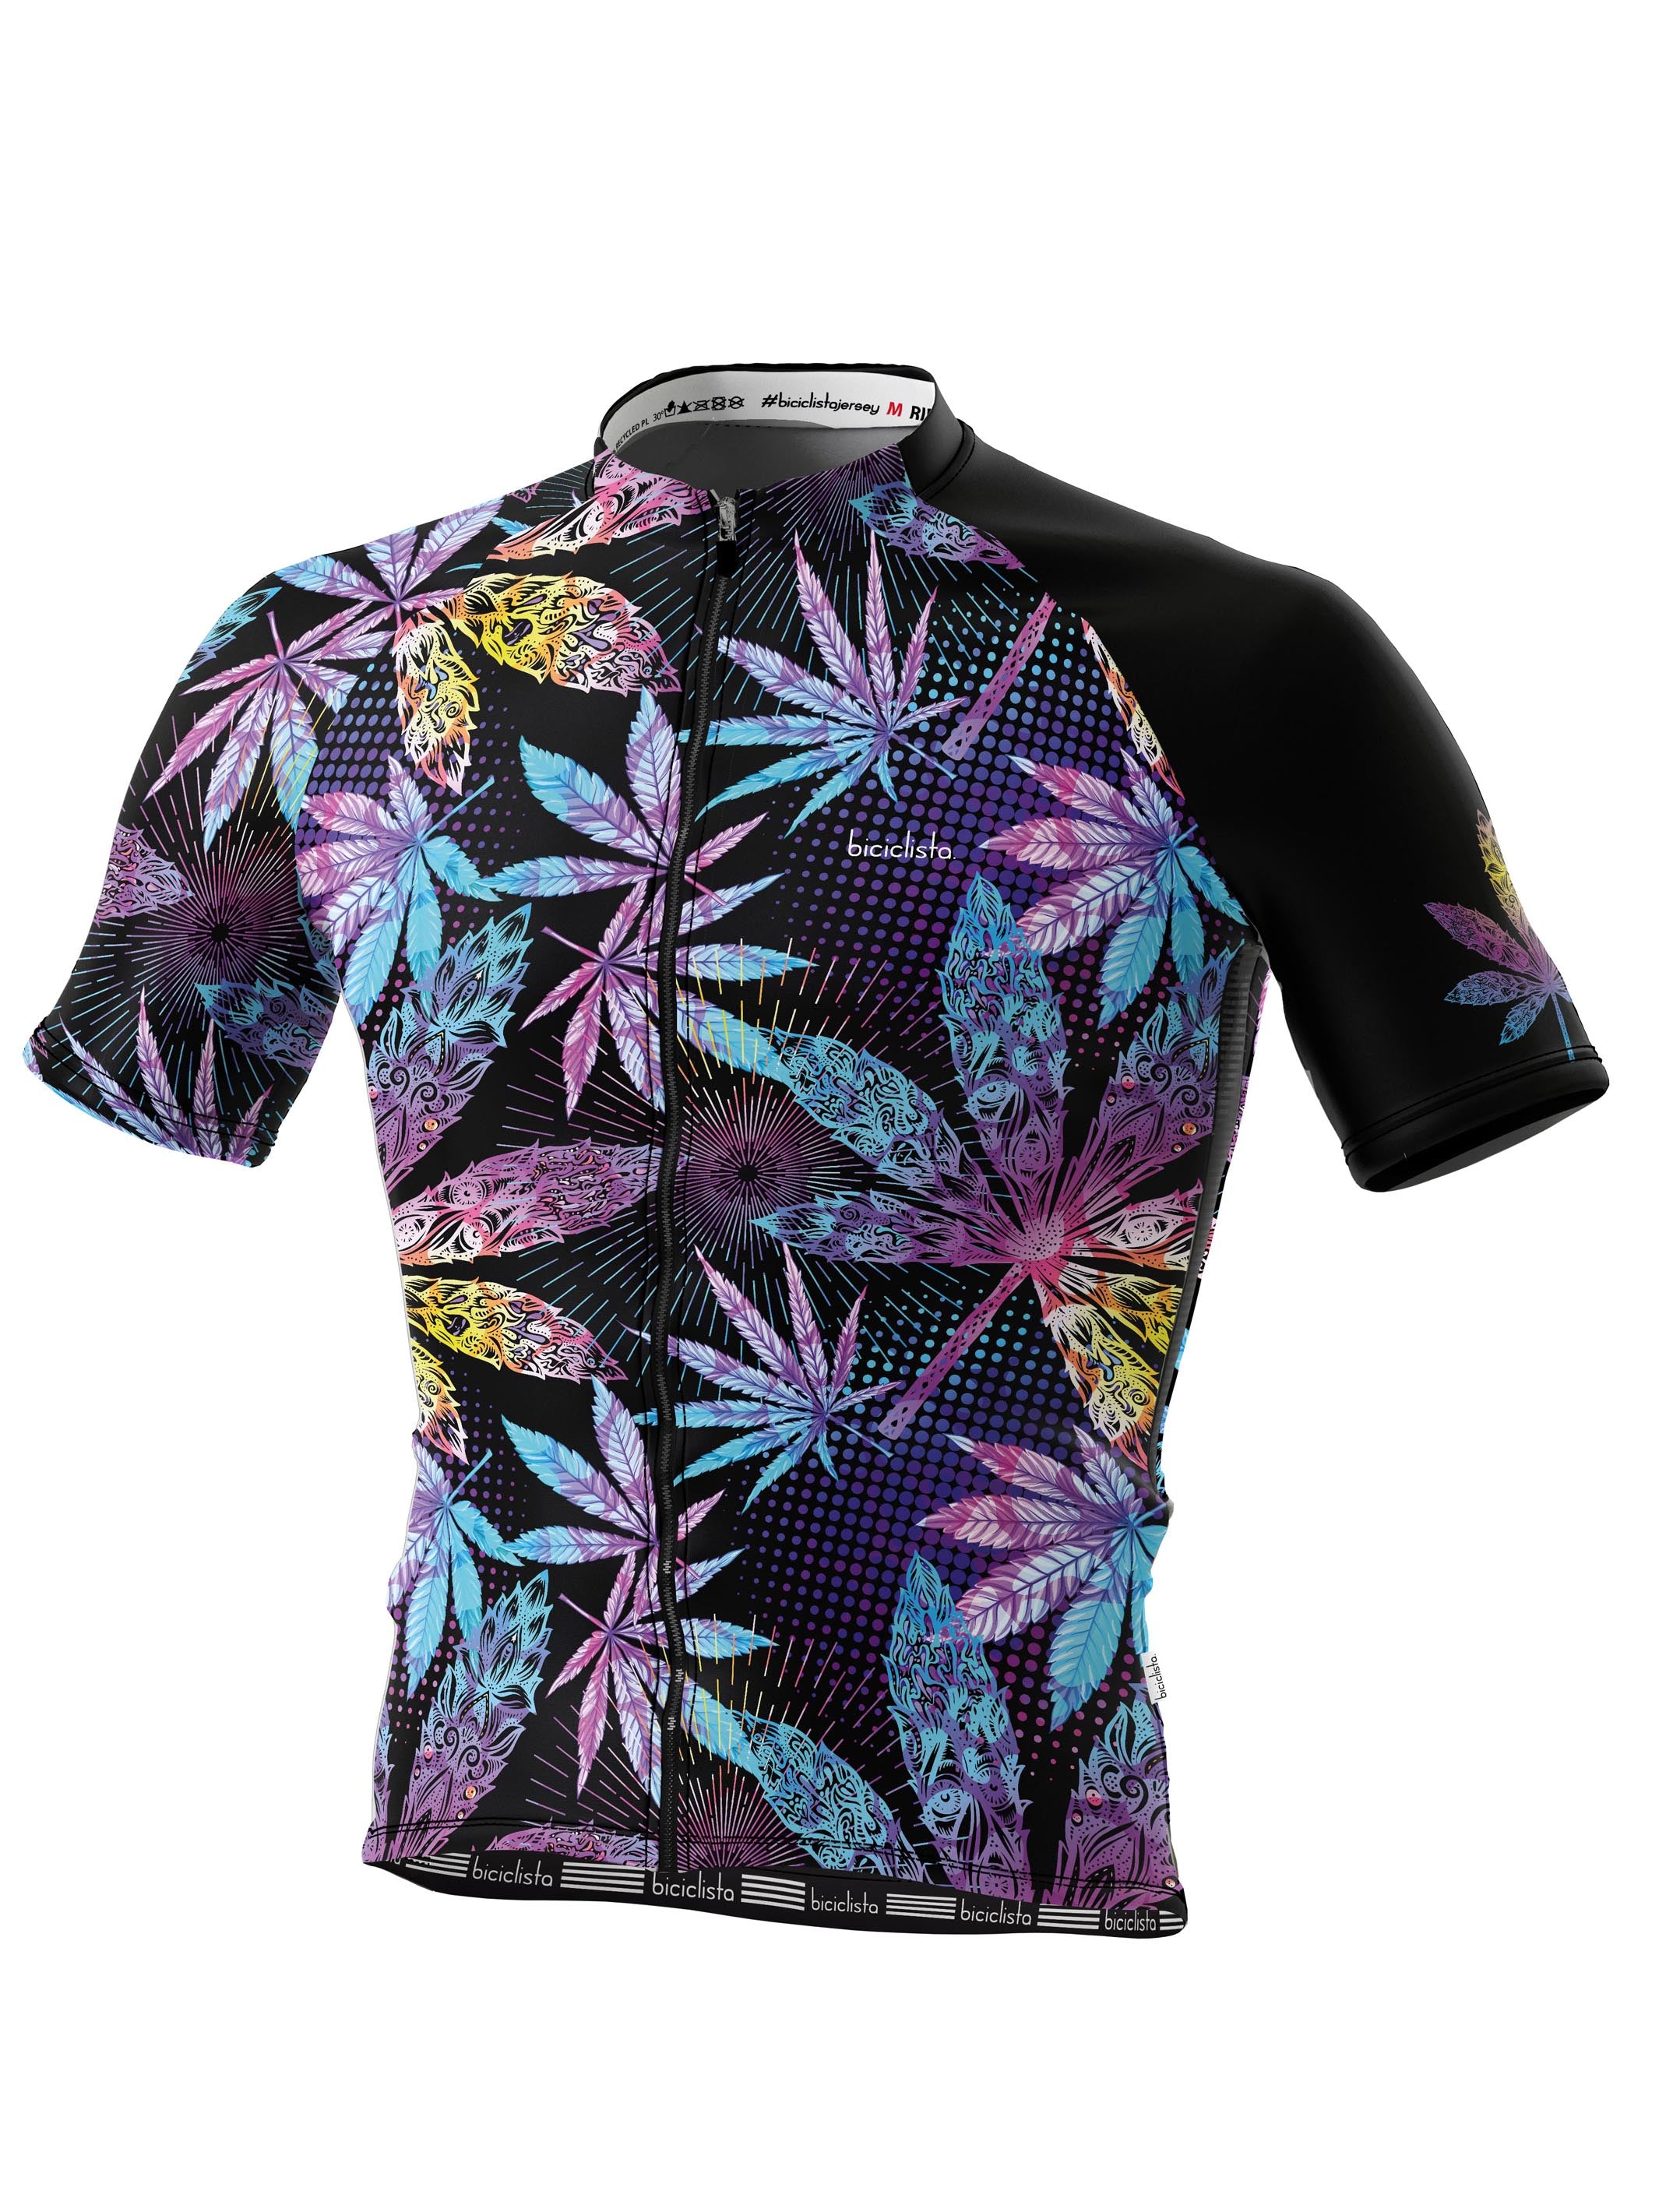 CXBD - Men's Right-on Jersey